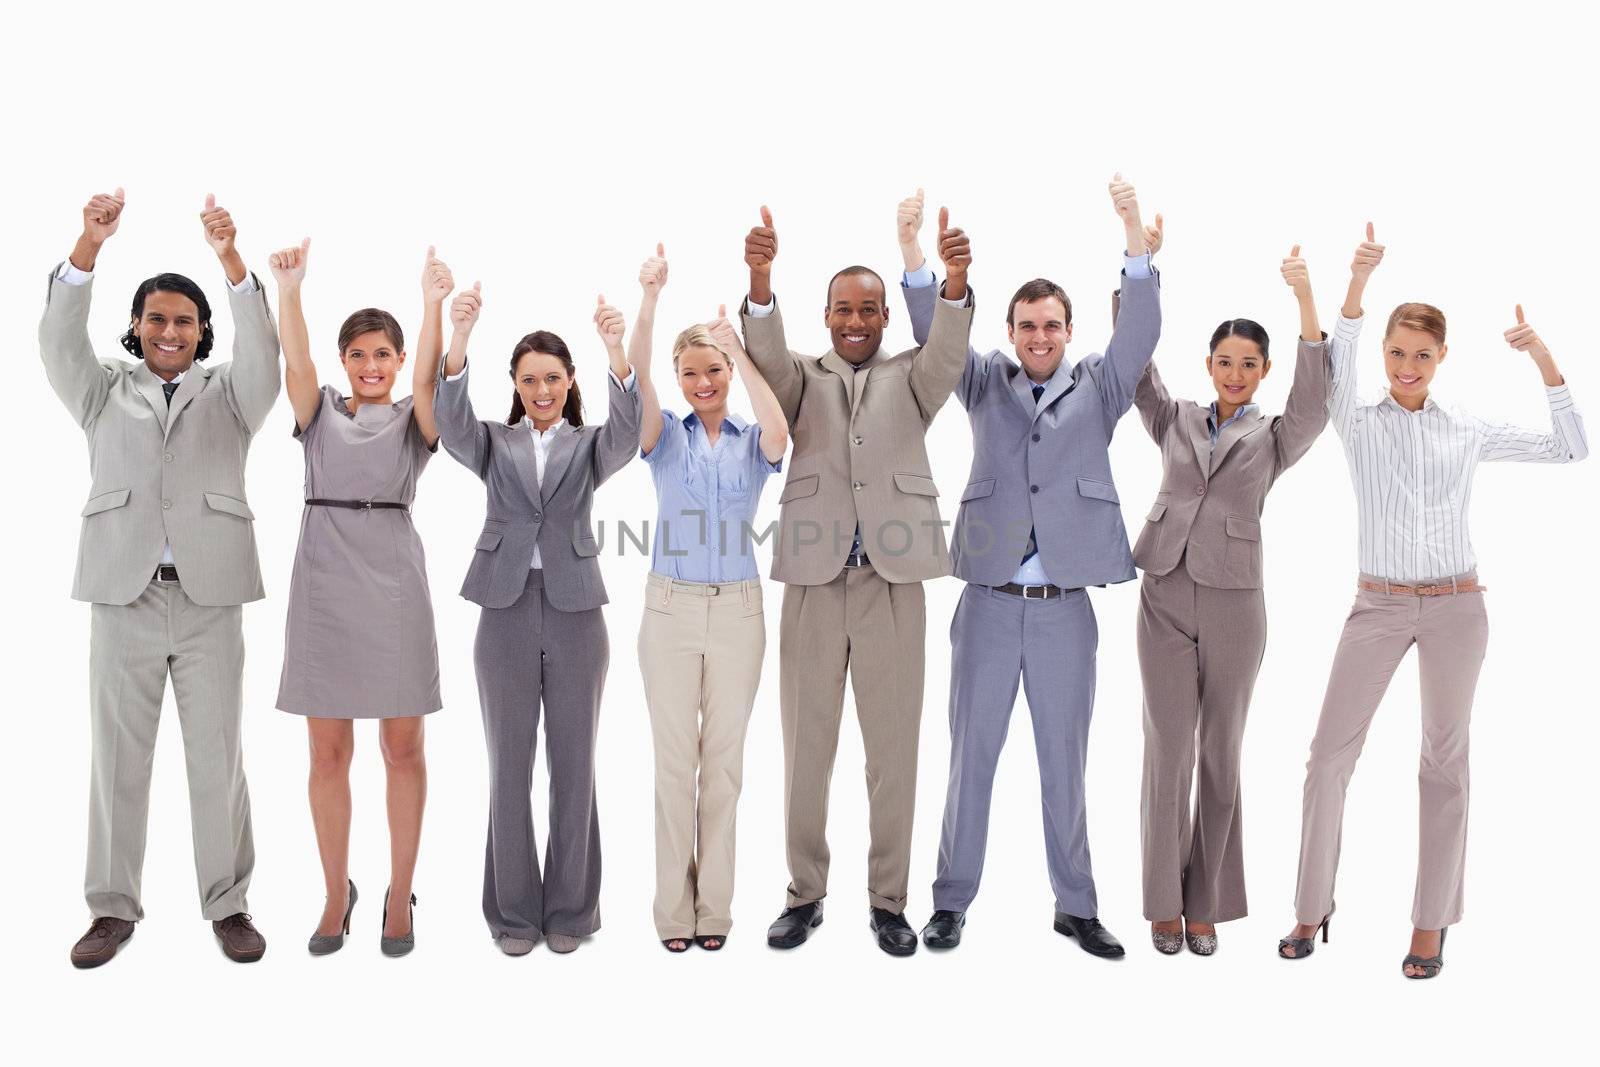 Business team raising their arms with the thumbs up against white background